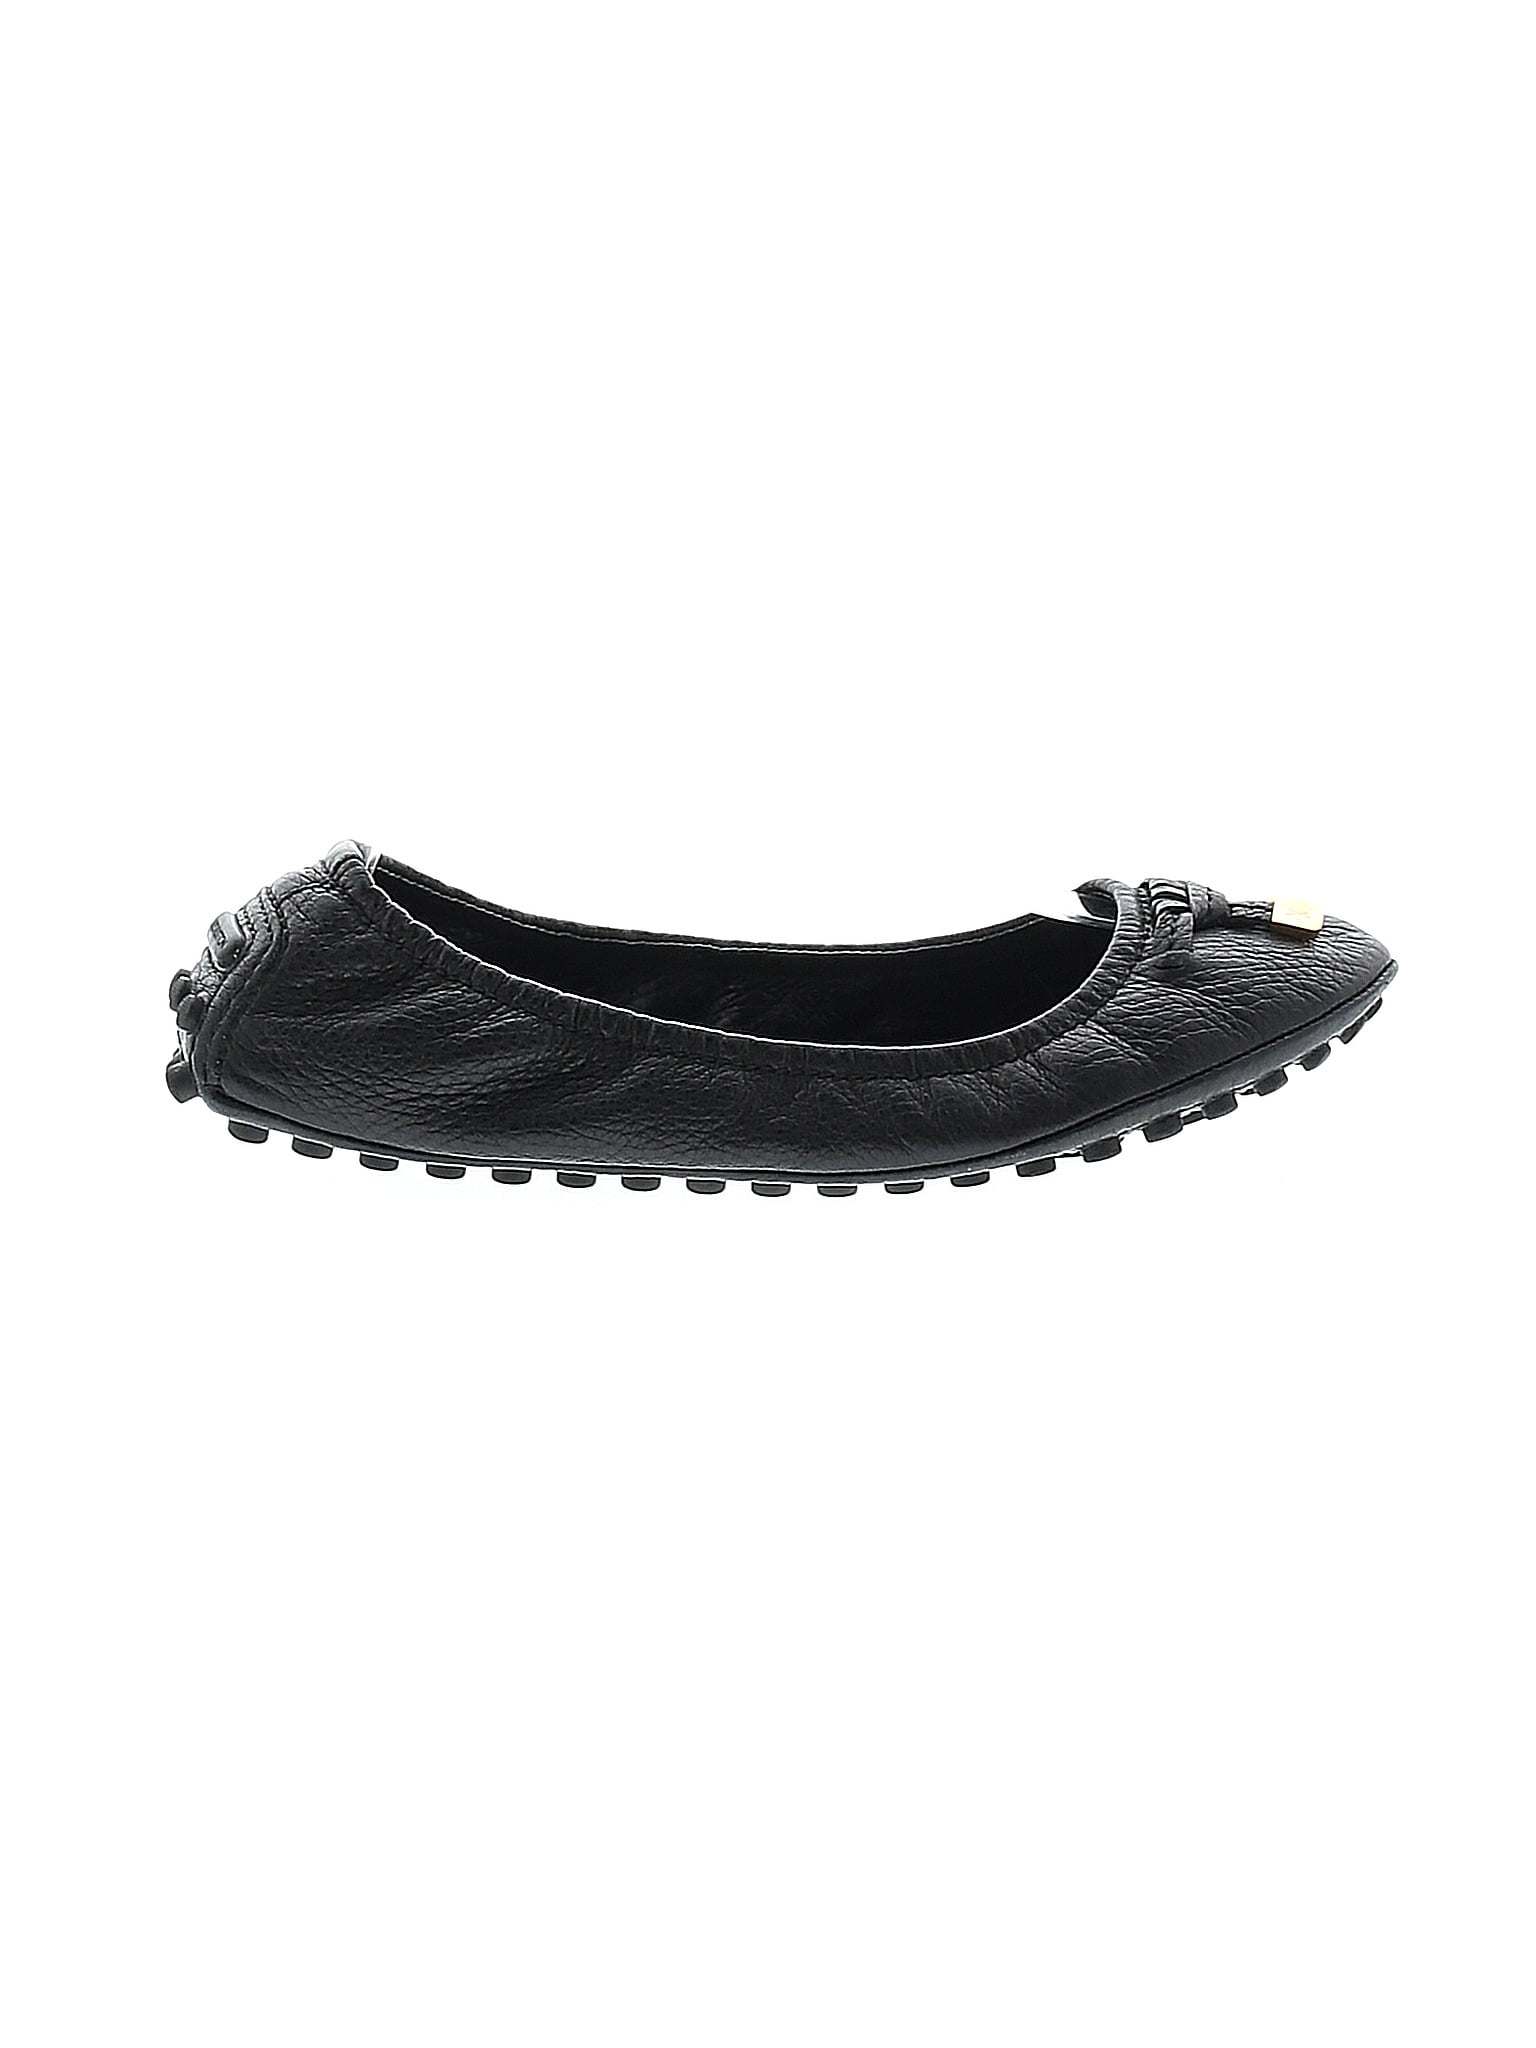 Louis Vuitton Perforated Suede Oxford Ballet Flats